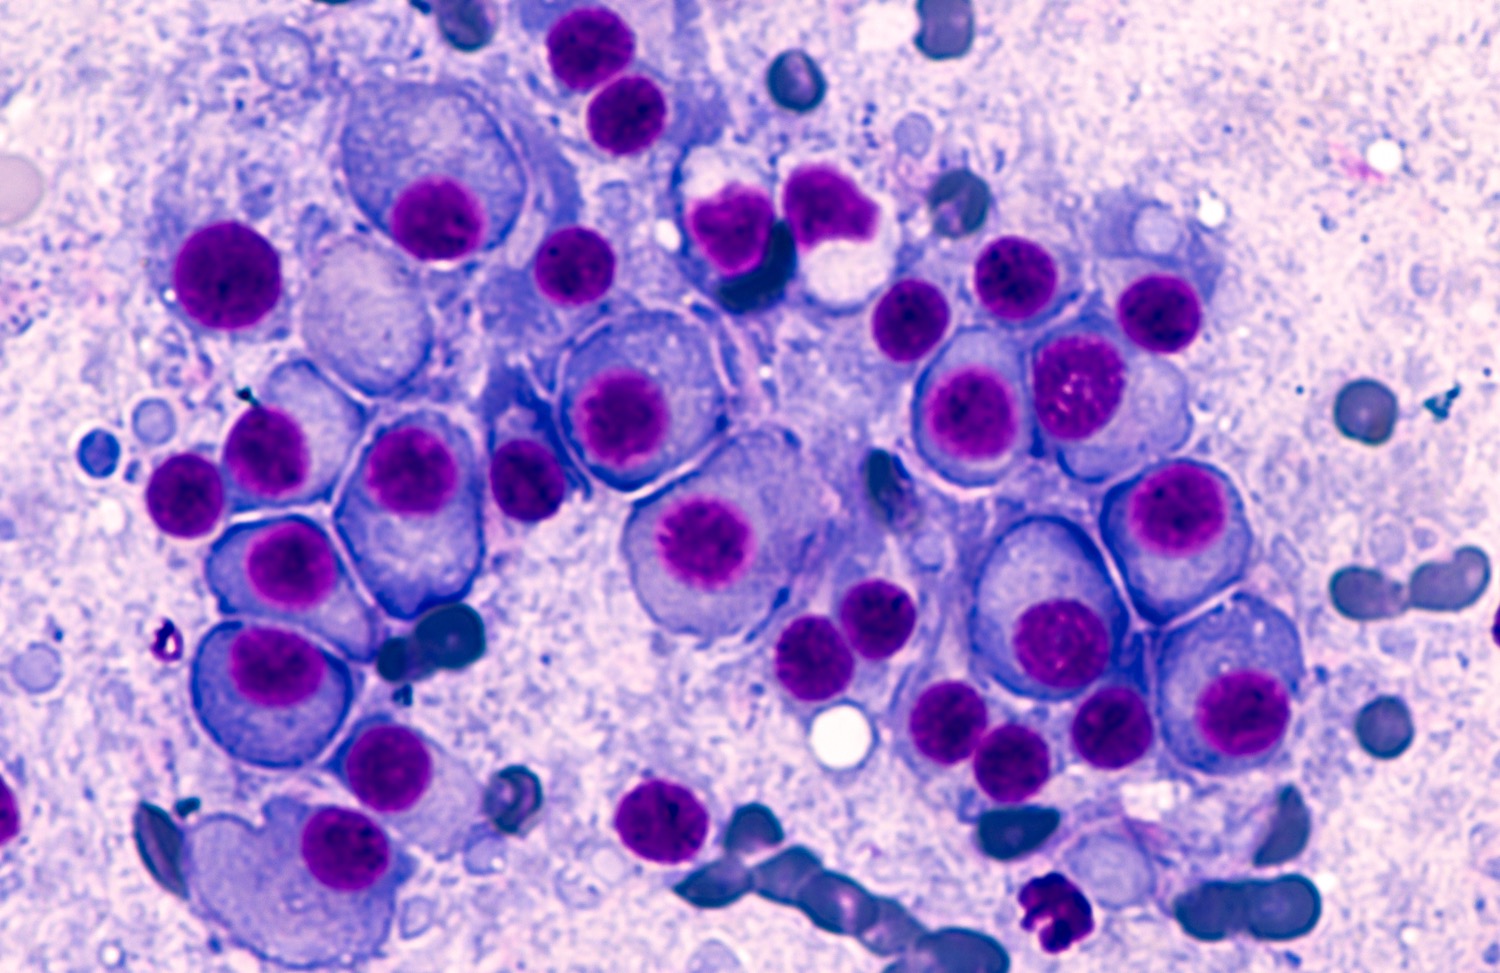 a microscopic image of a cluster of a couple dozen purple cells with darker purple dots inside each of them